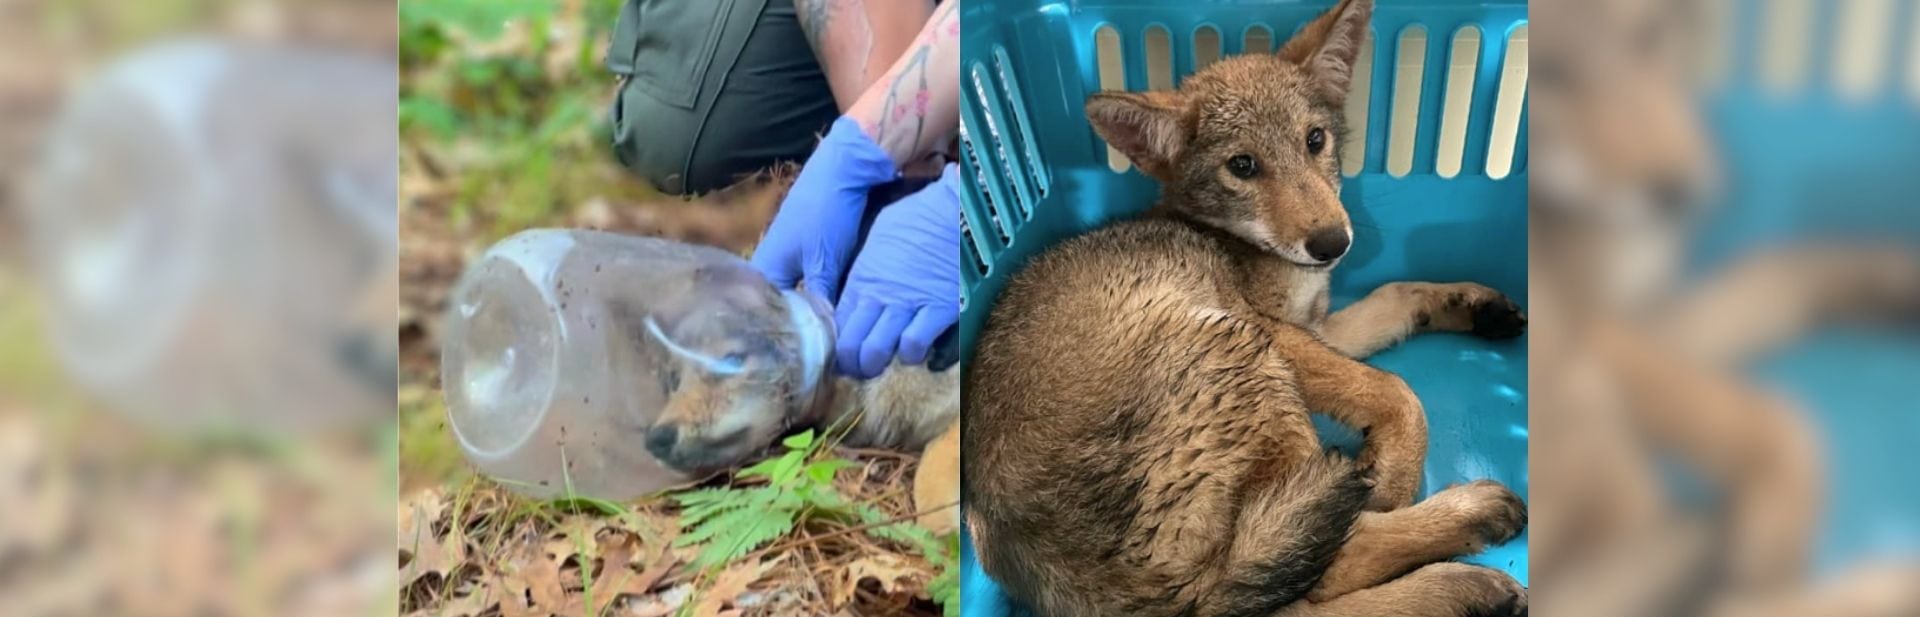 Coyote Pup Rescued from Plastic Trap by Local Heroes